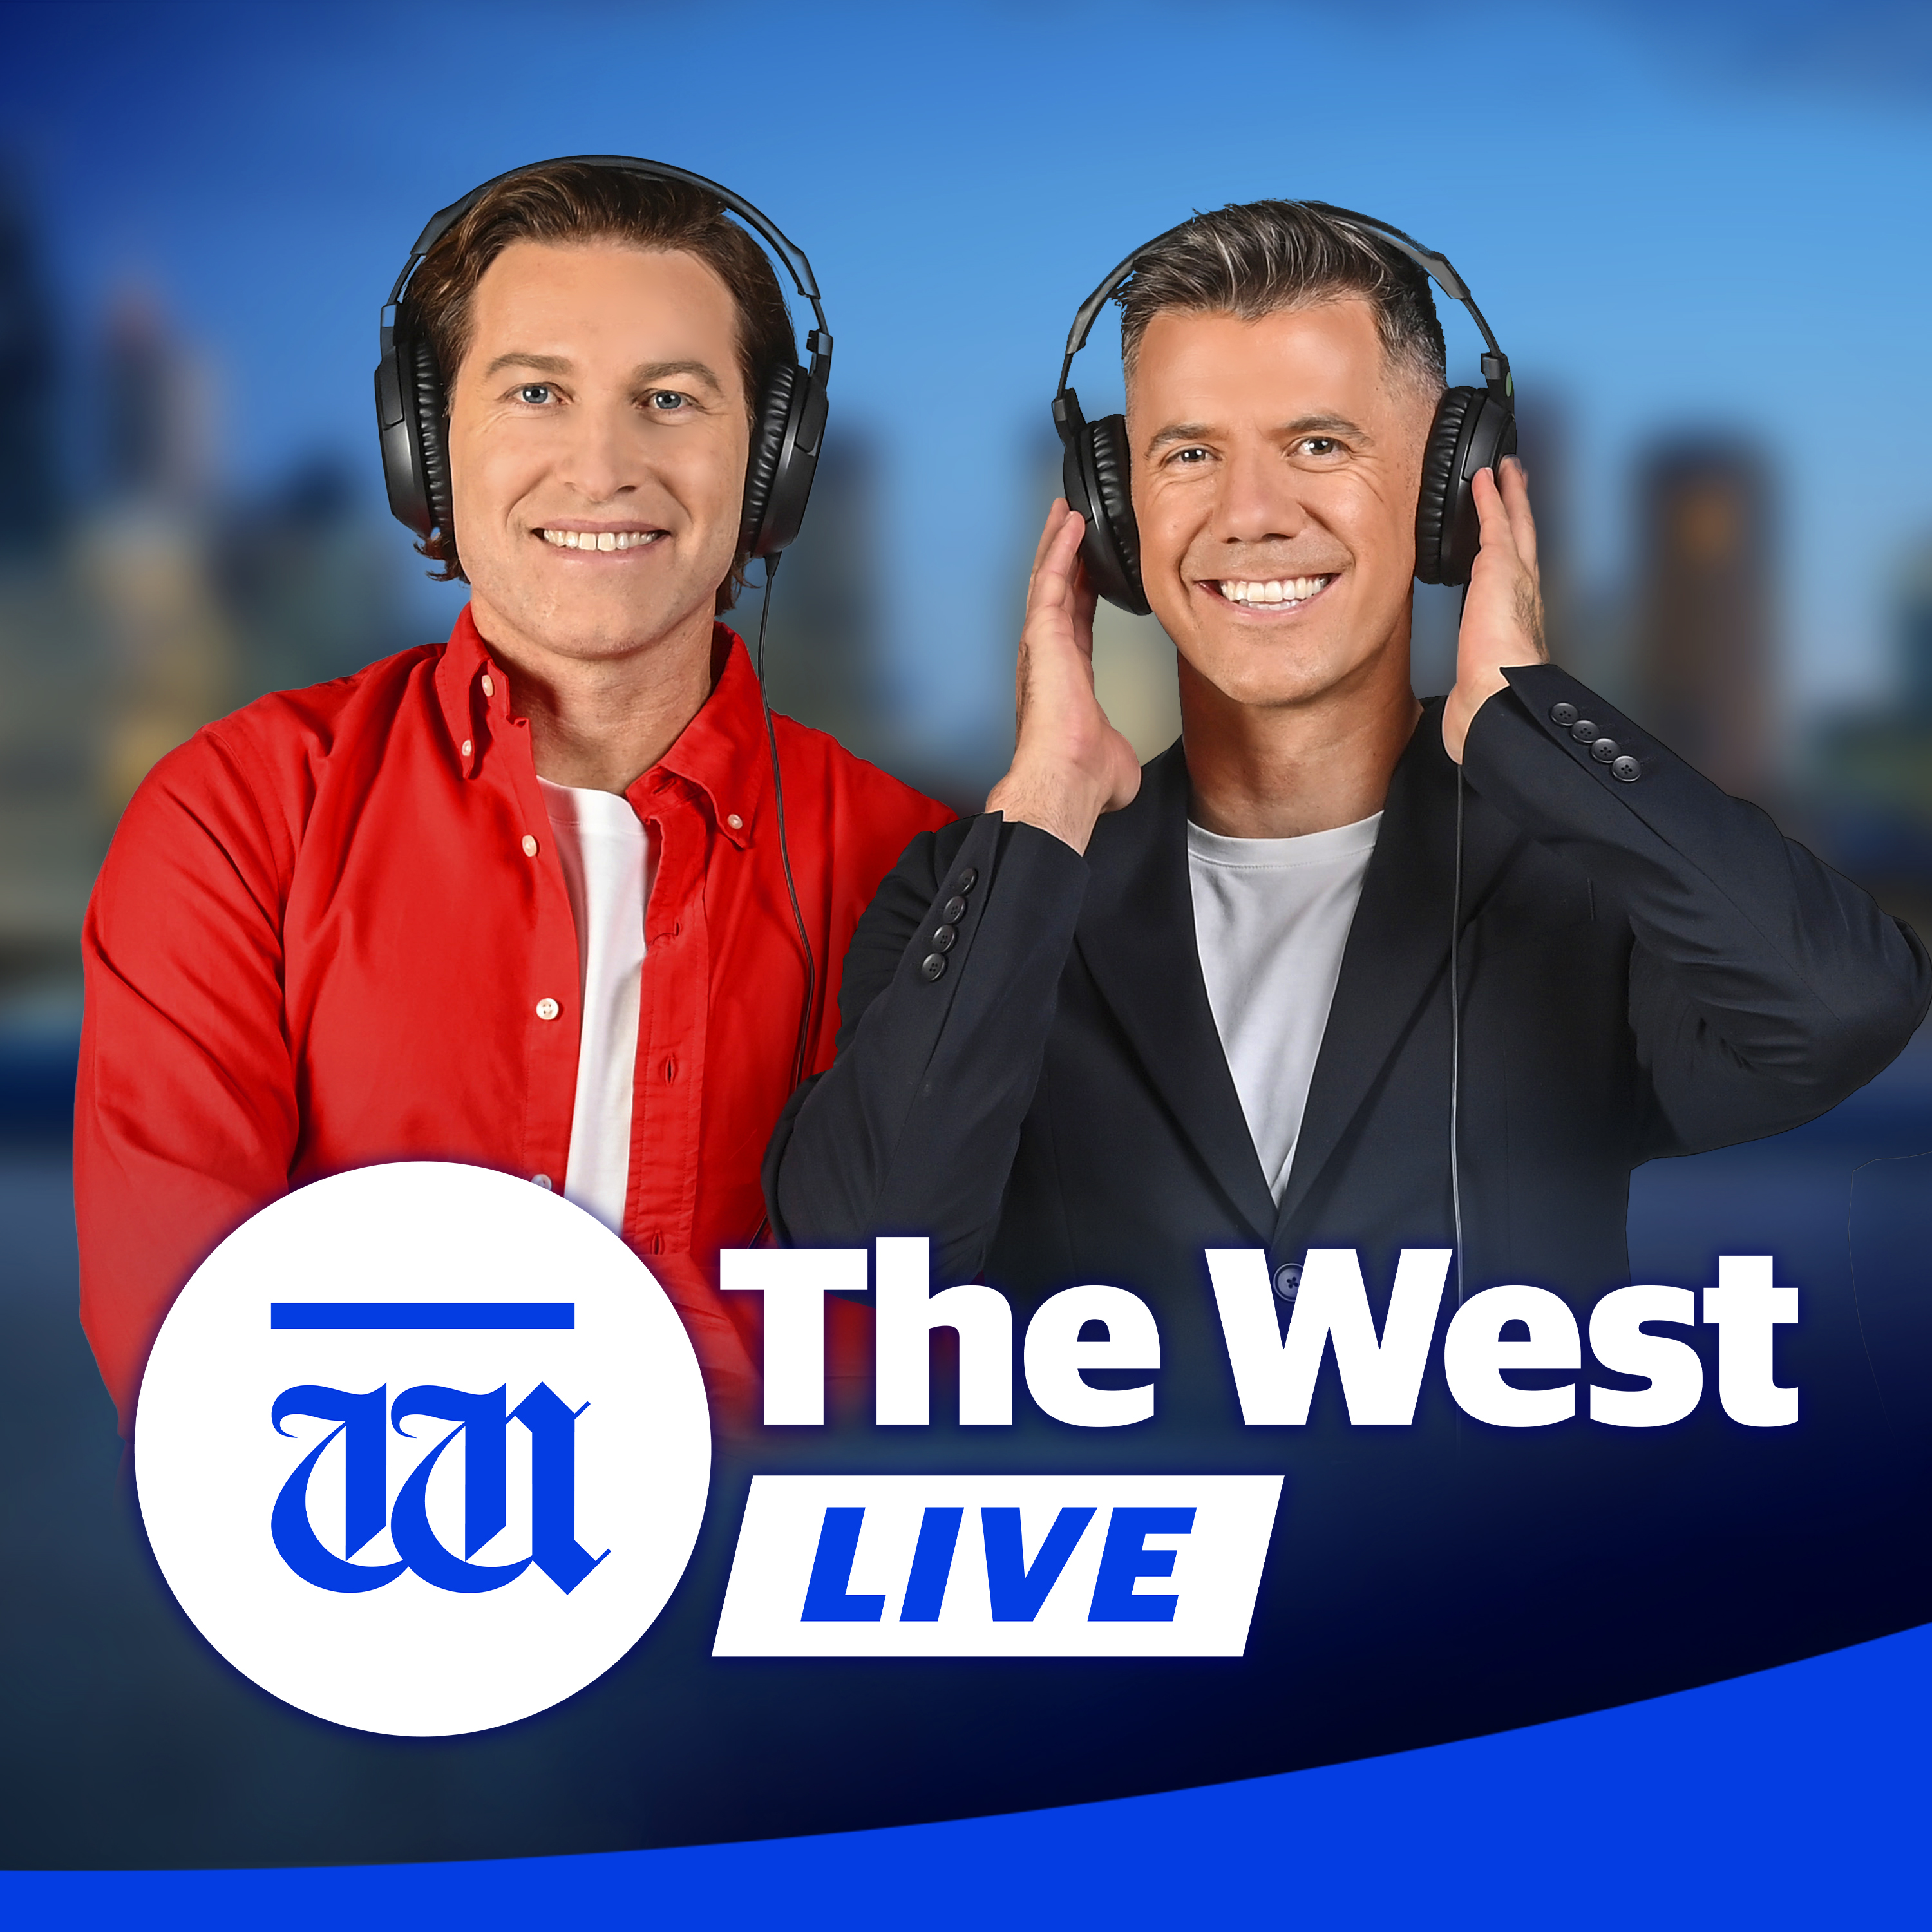 The West Live full show - Friday June 10, 2022